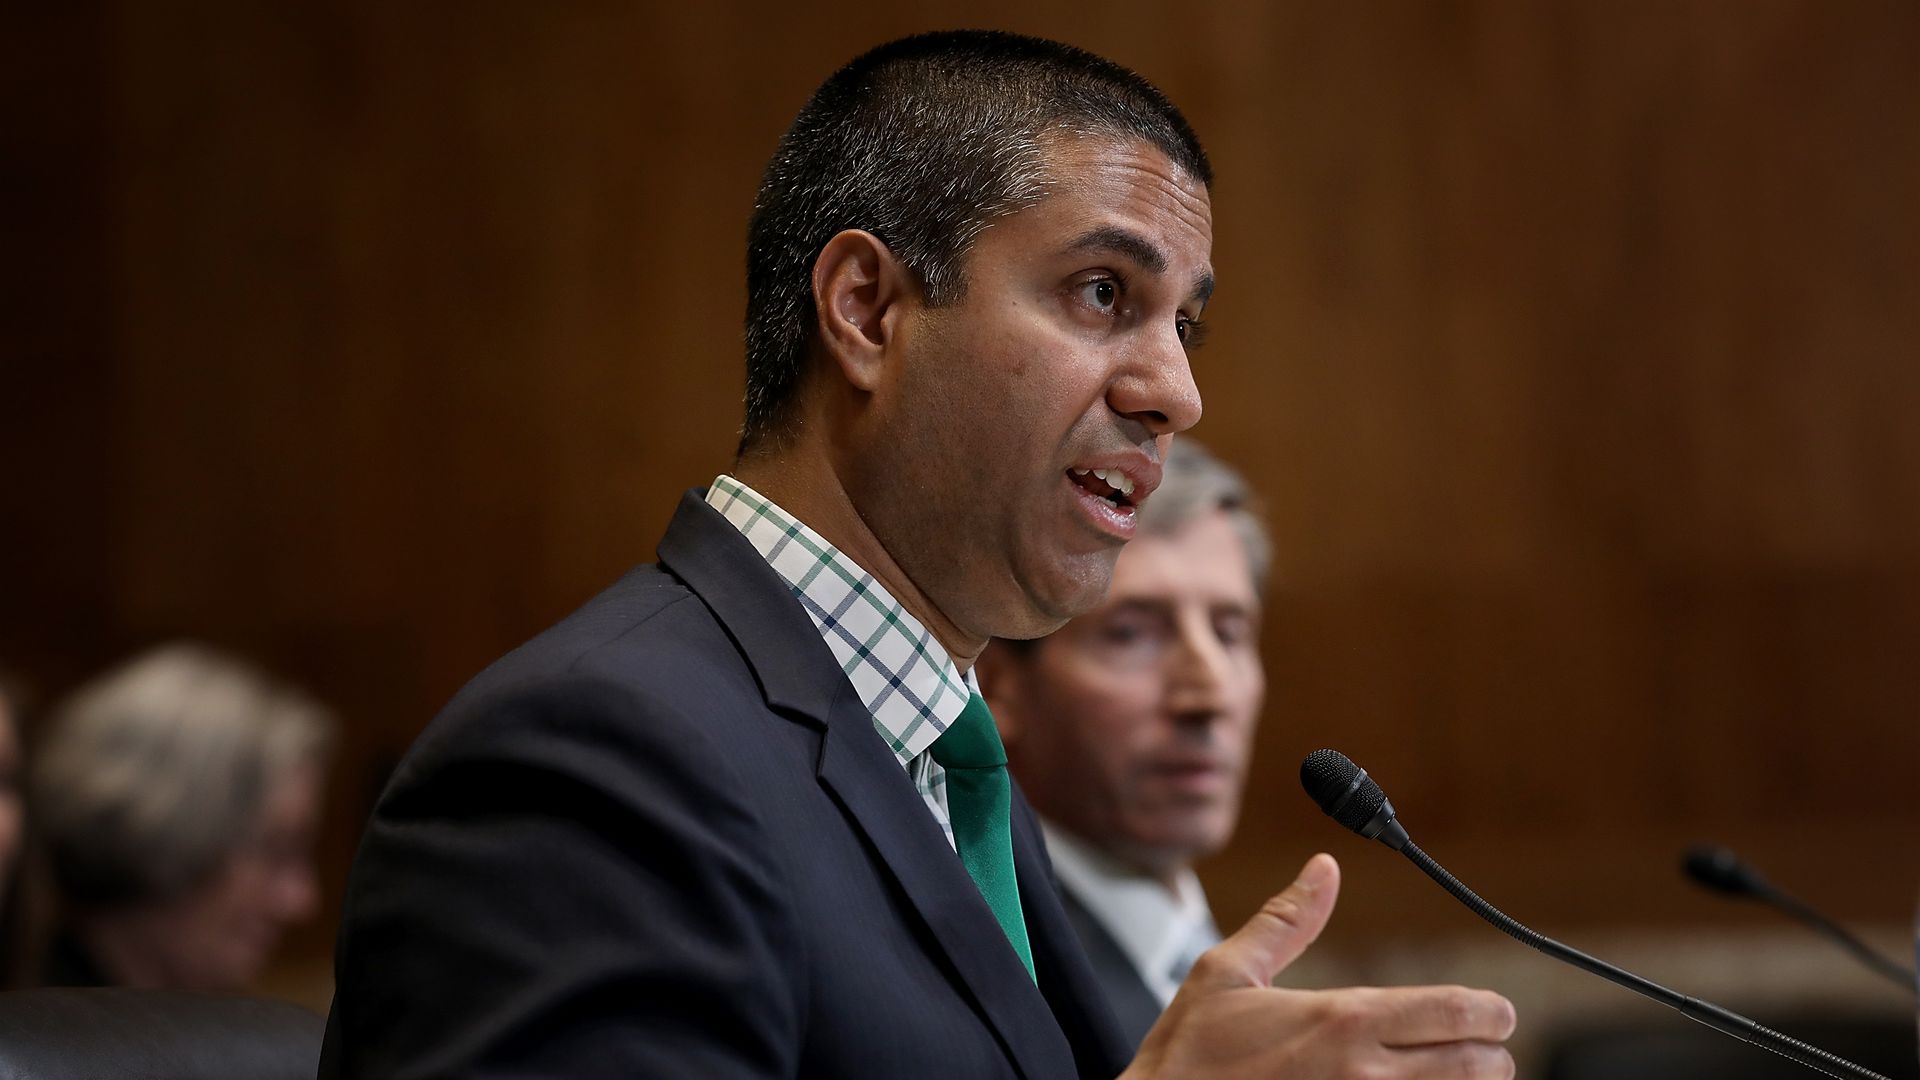 FCC Chairman Ajit Pai speaks into a microphone at a congressional hearing